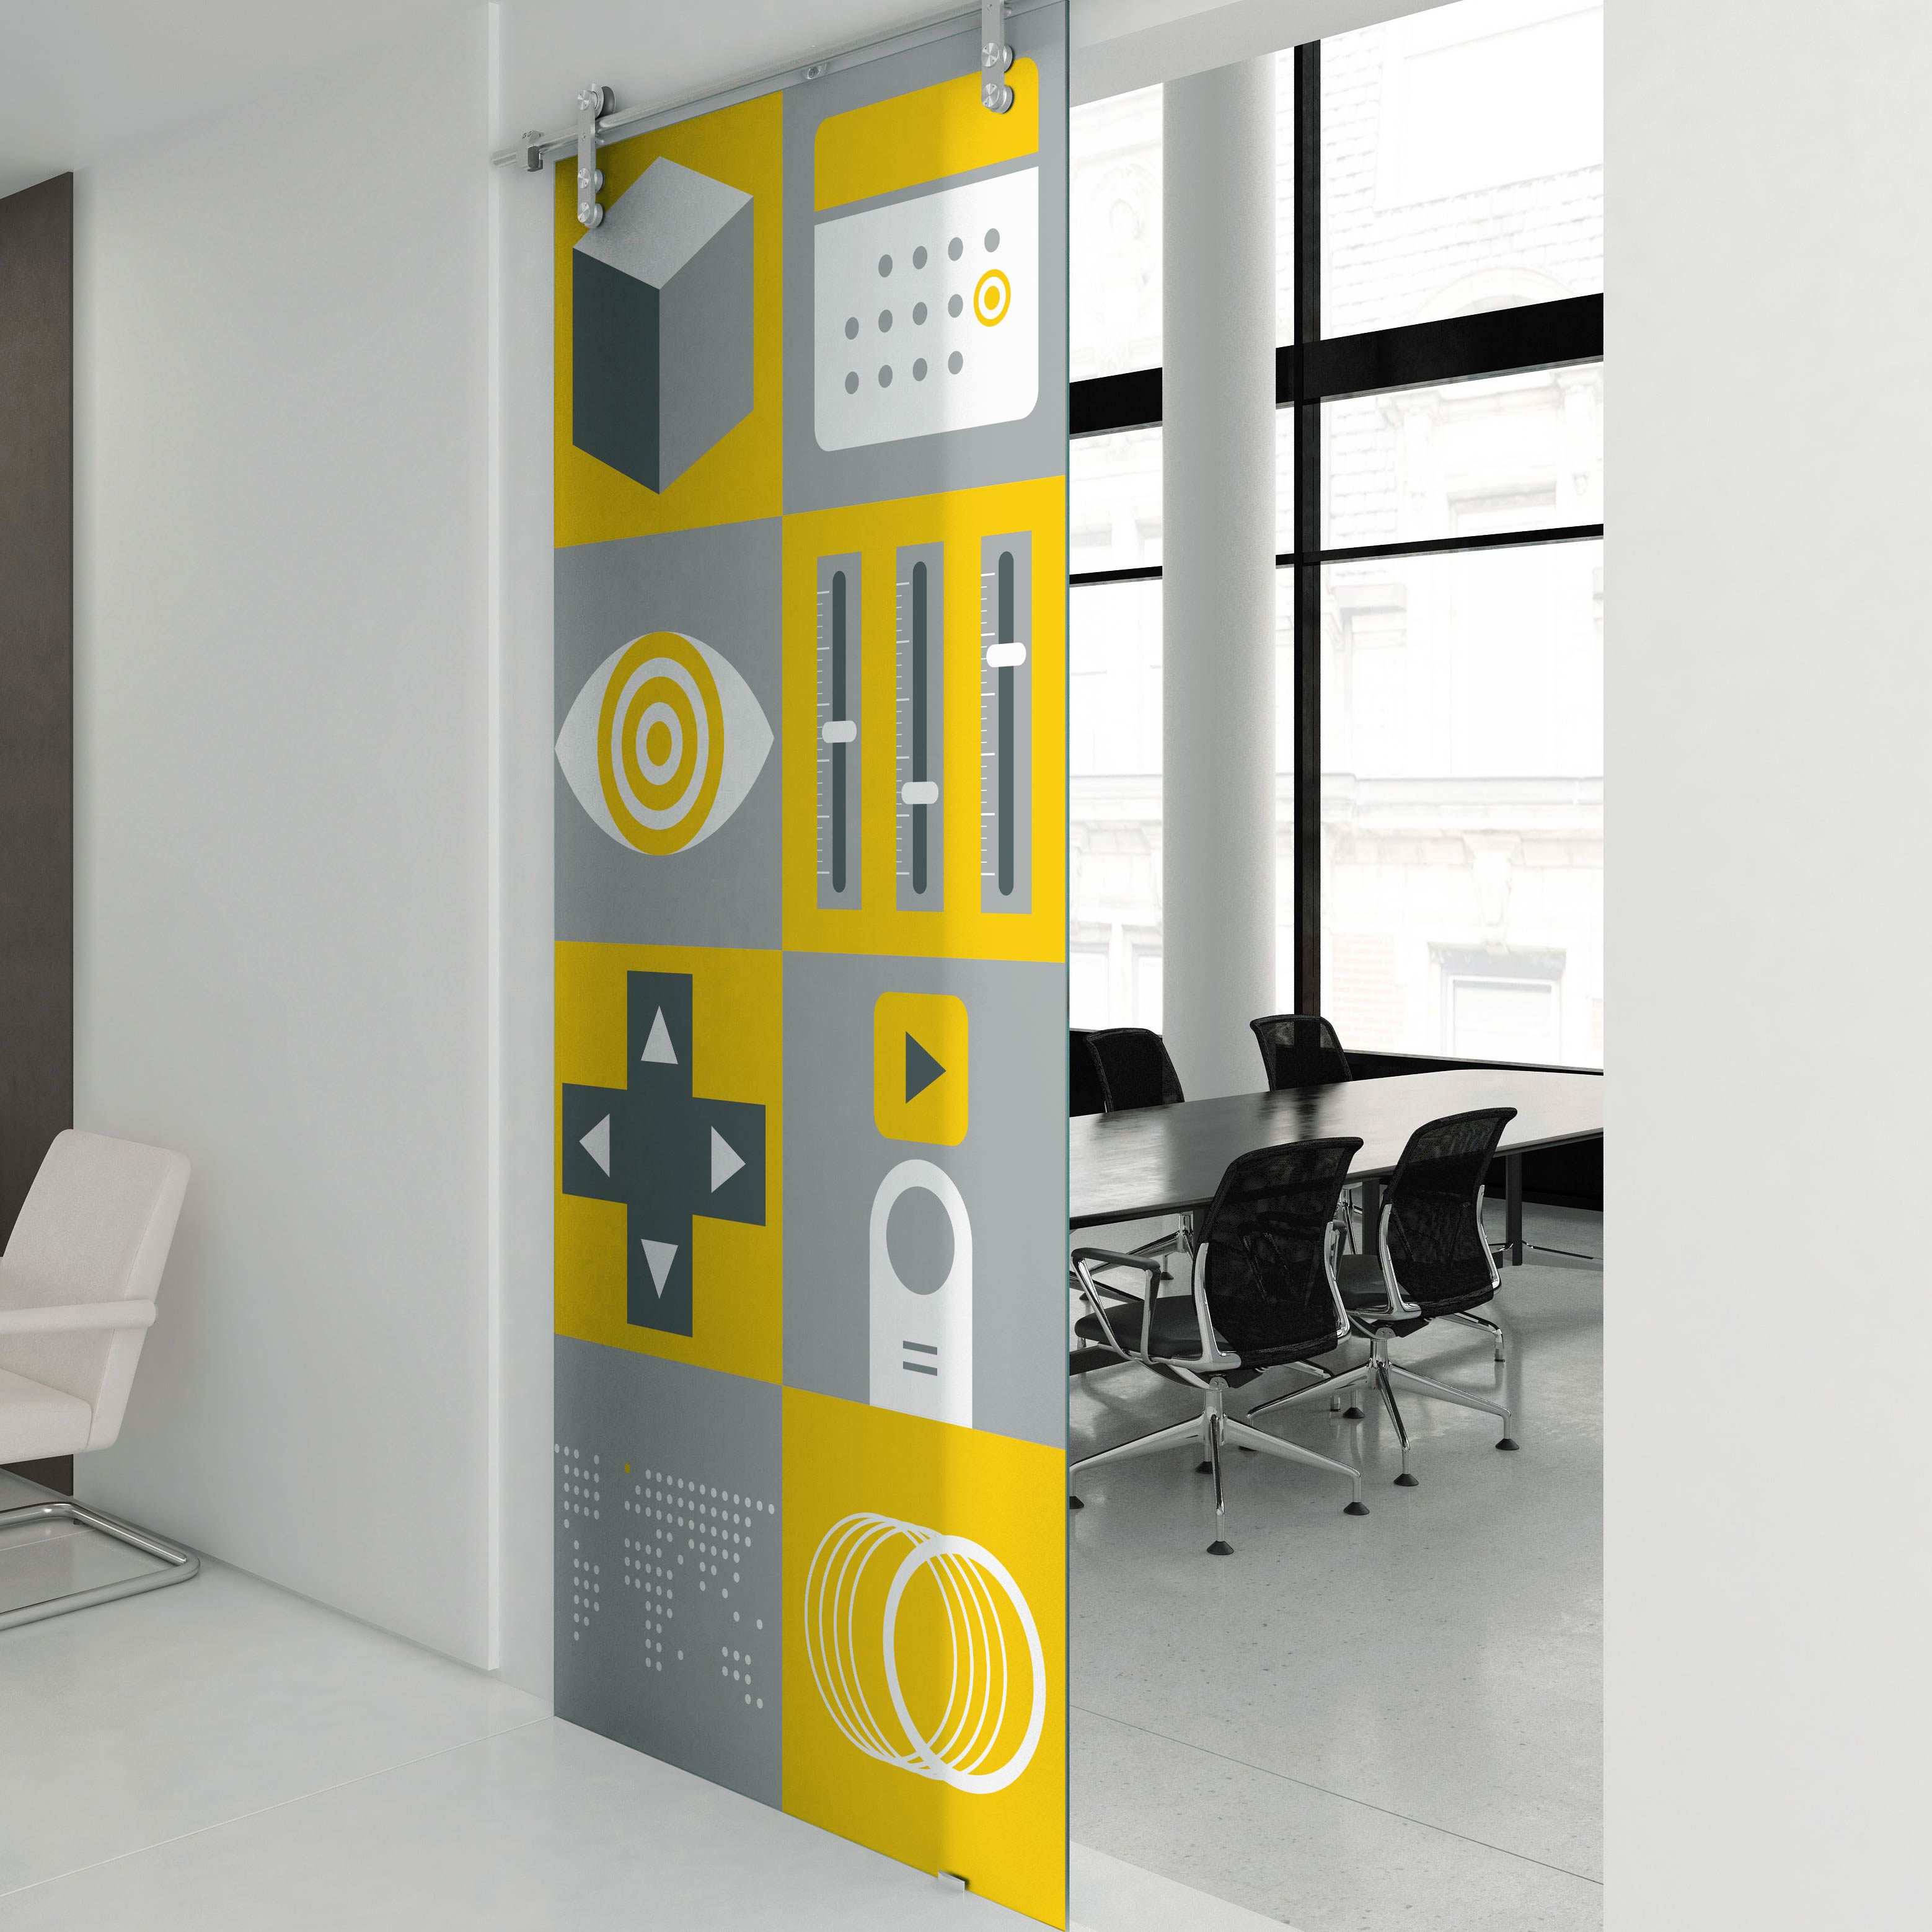 Interference Pattern animation studio internal environmental graphics designed by Monumentum Brands